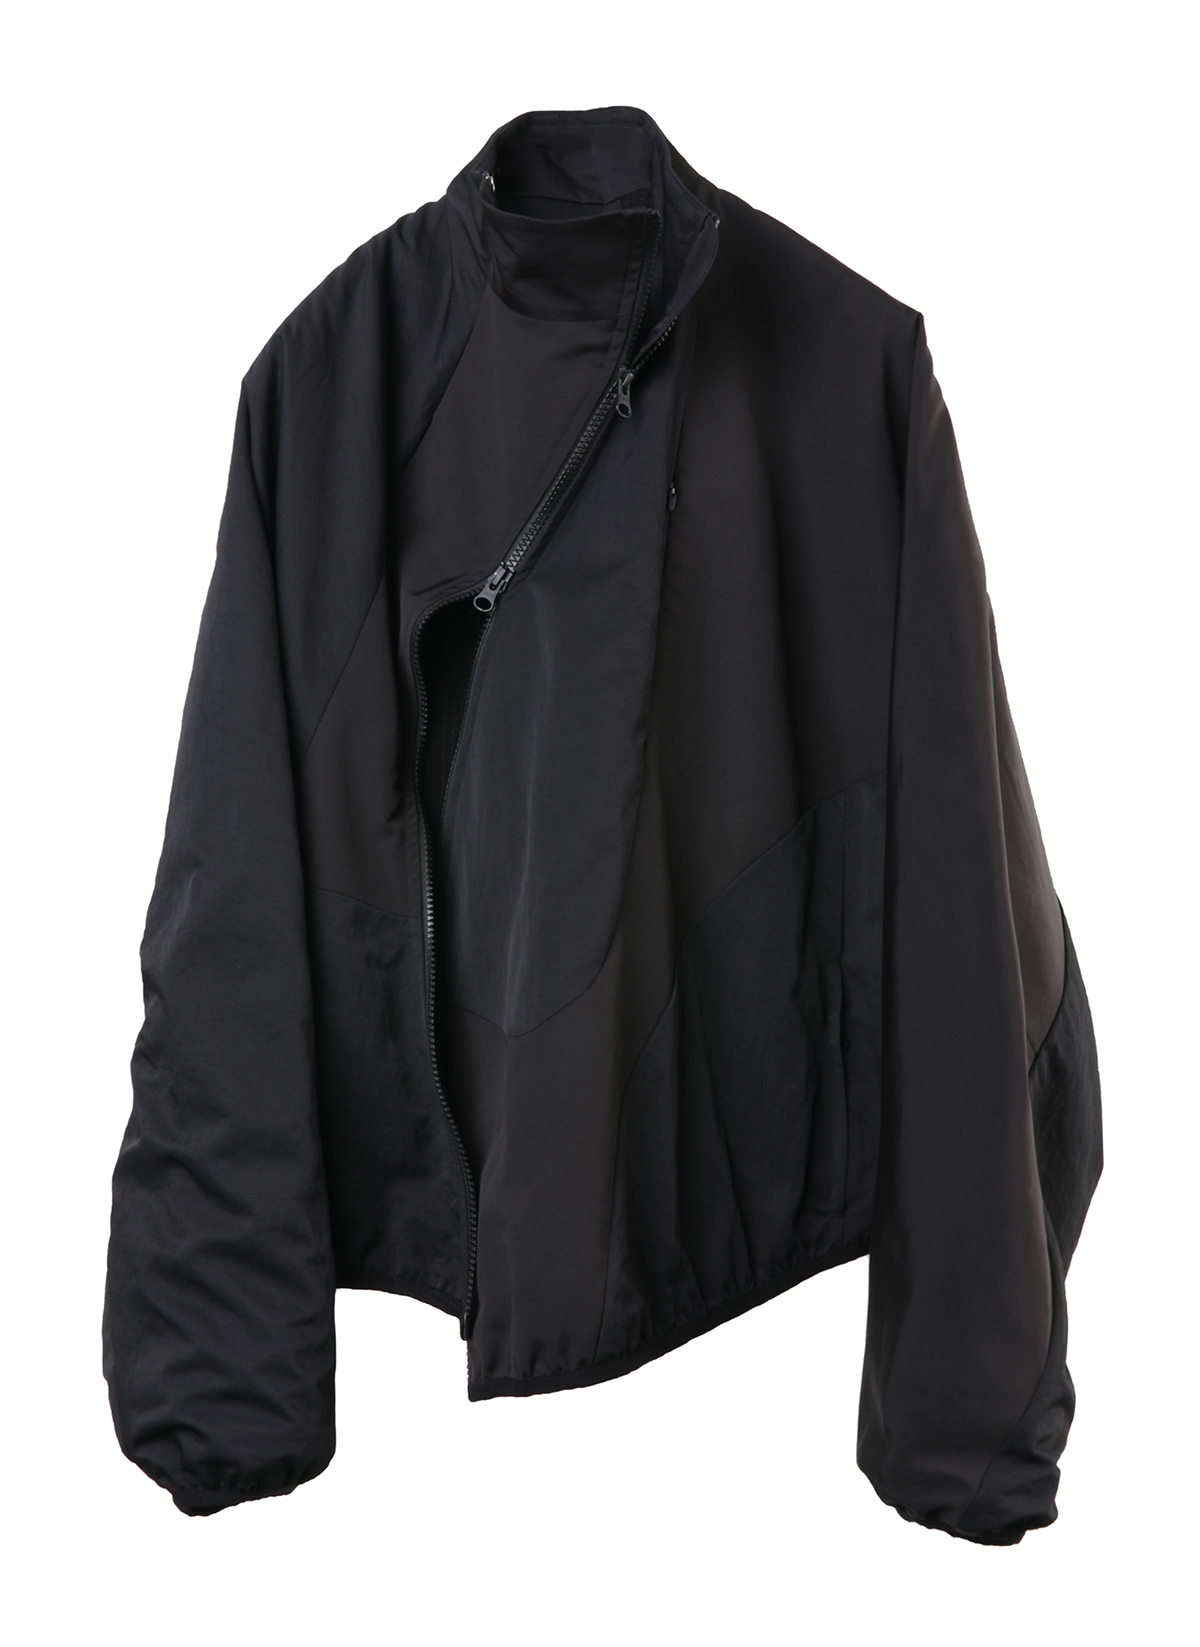 3.1 TECHNICAL JACKET RIGHT (BLACK)